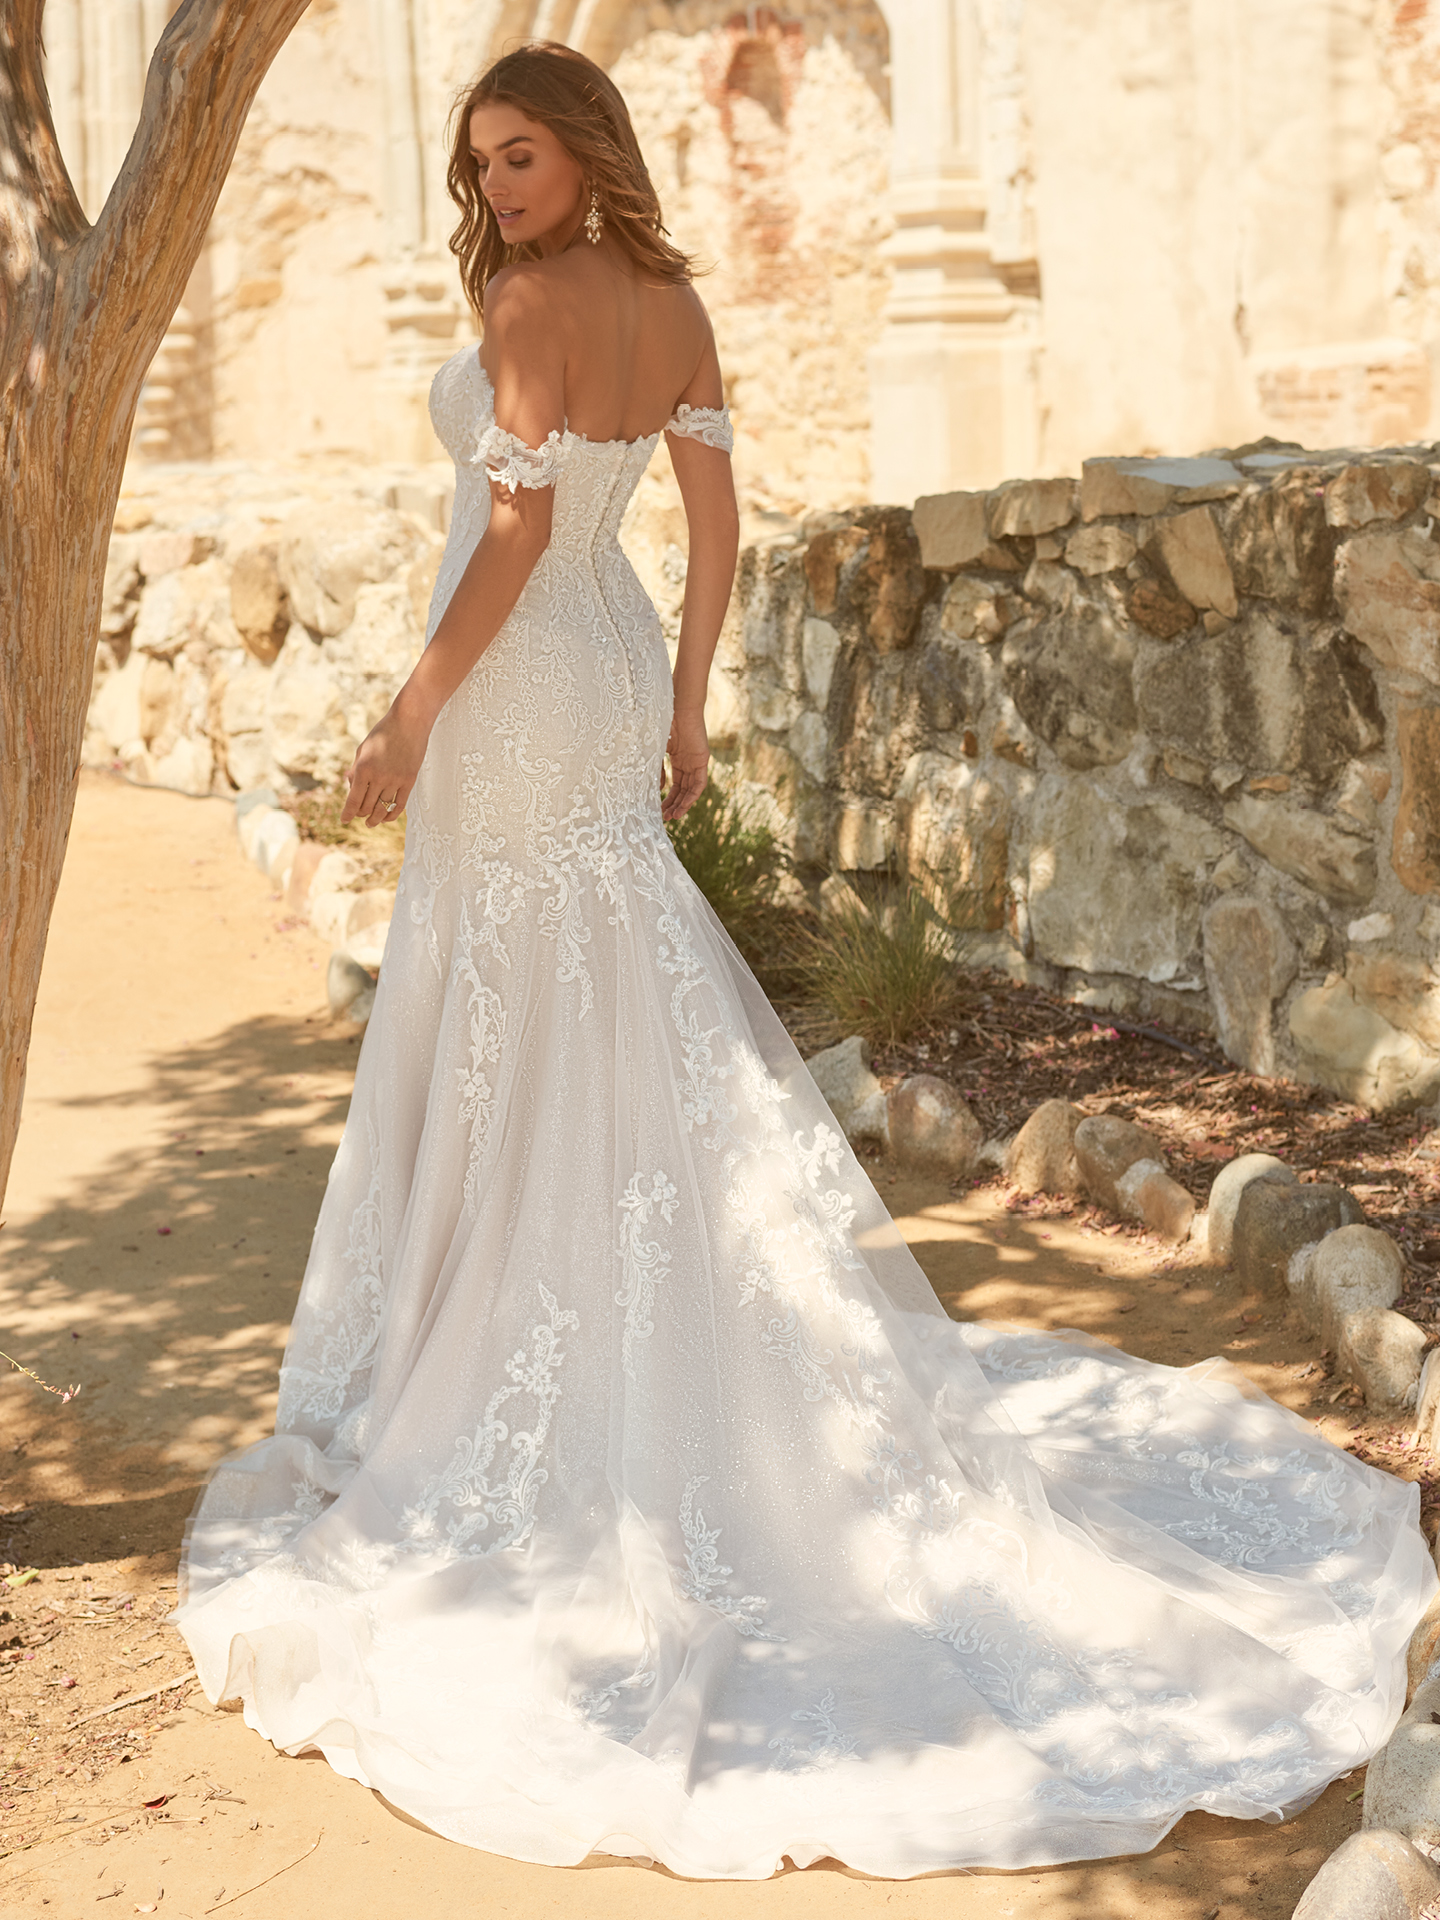 Bride In Strapless Fit-And-Flare Wedding Dress Called Frederique By Maggie Sottero